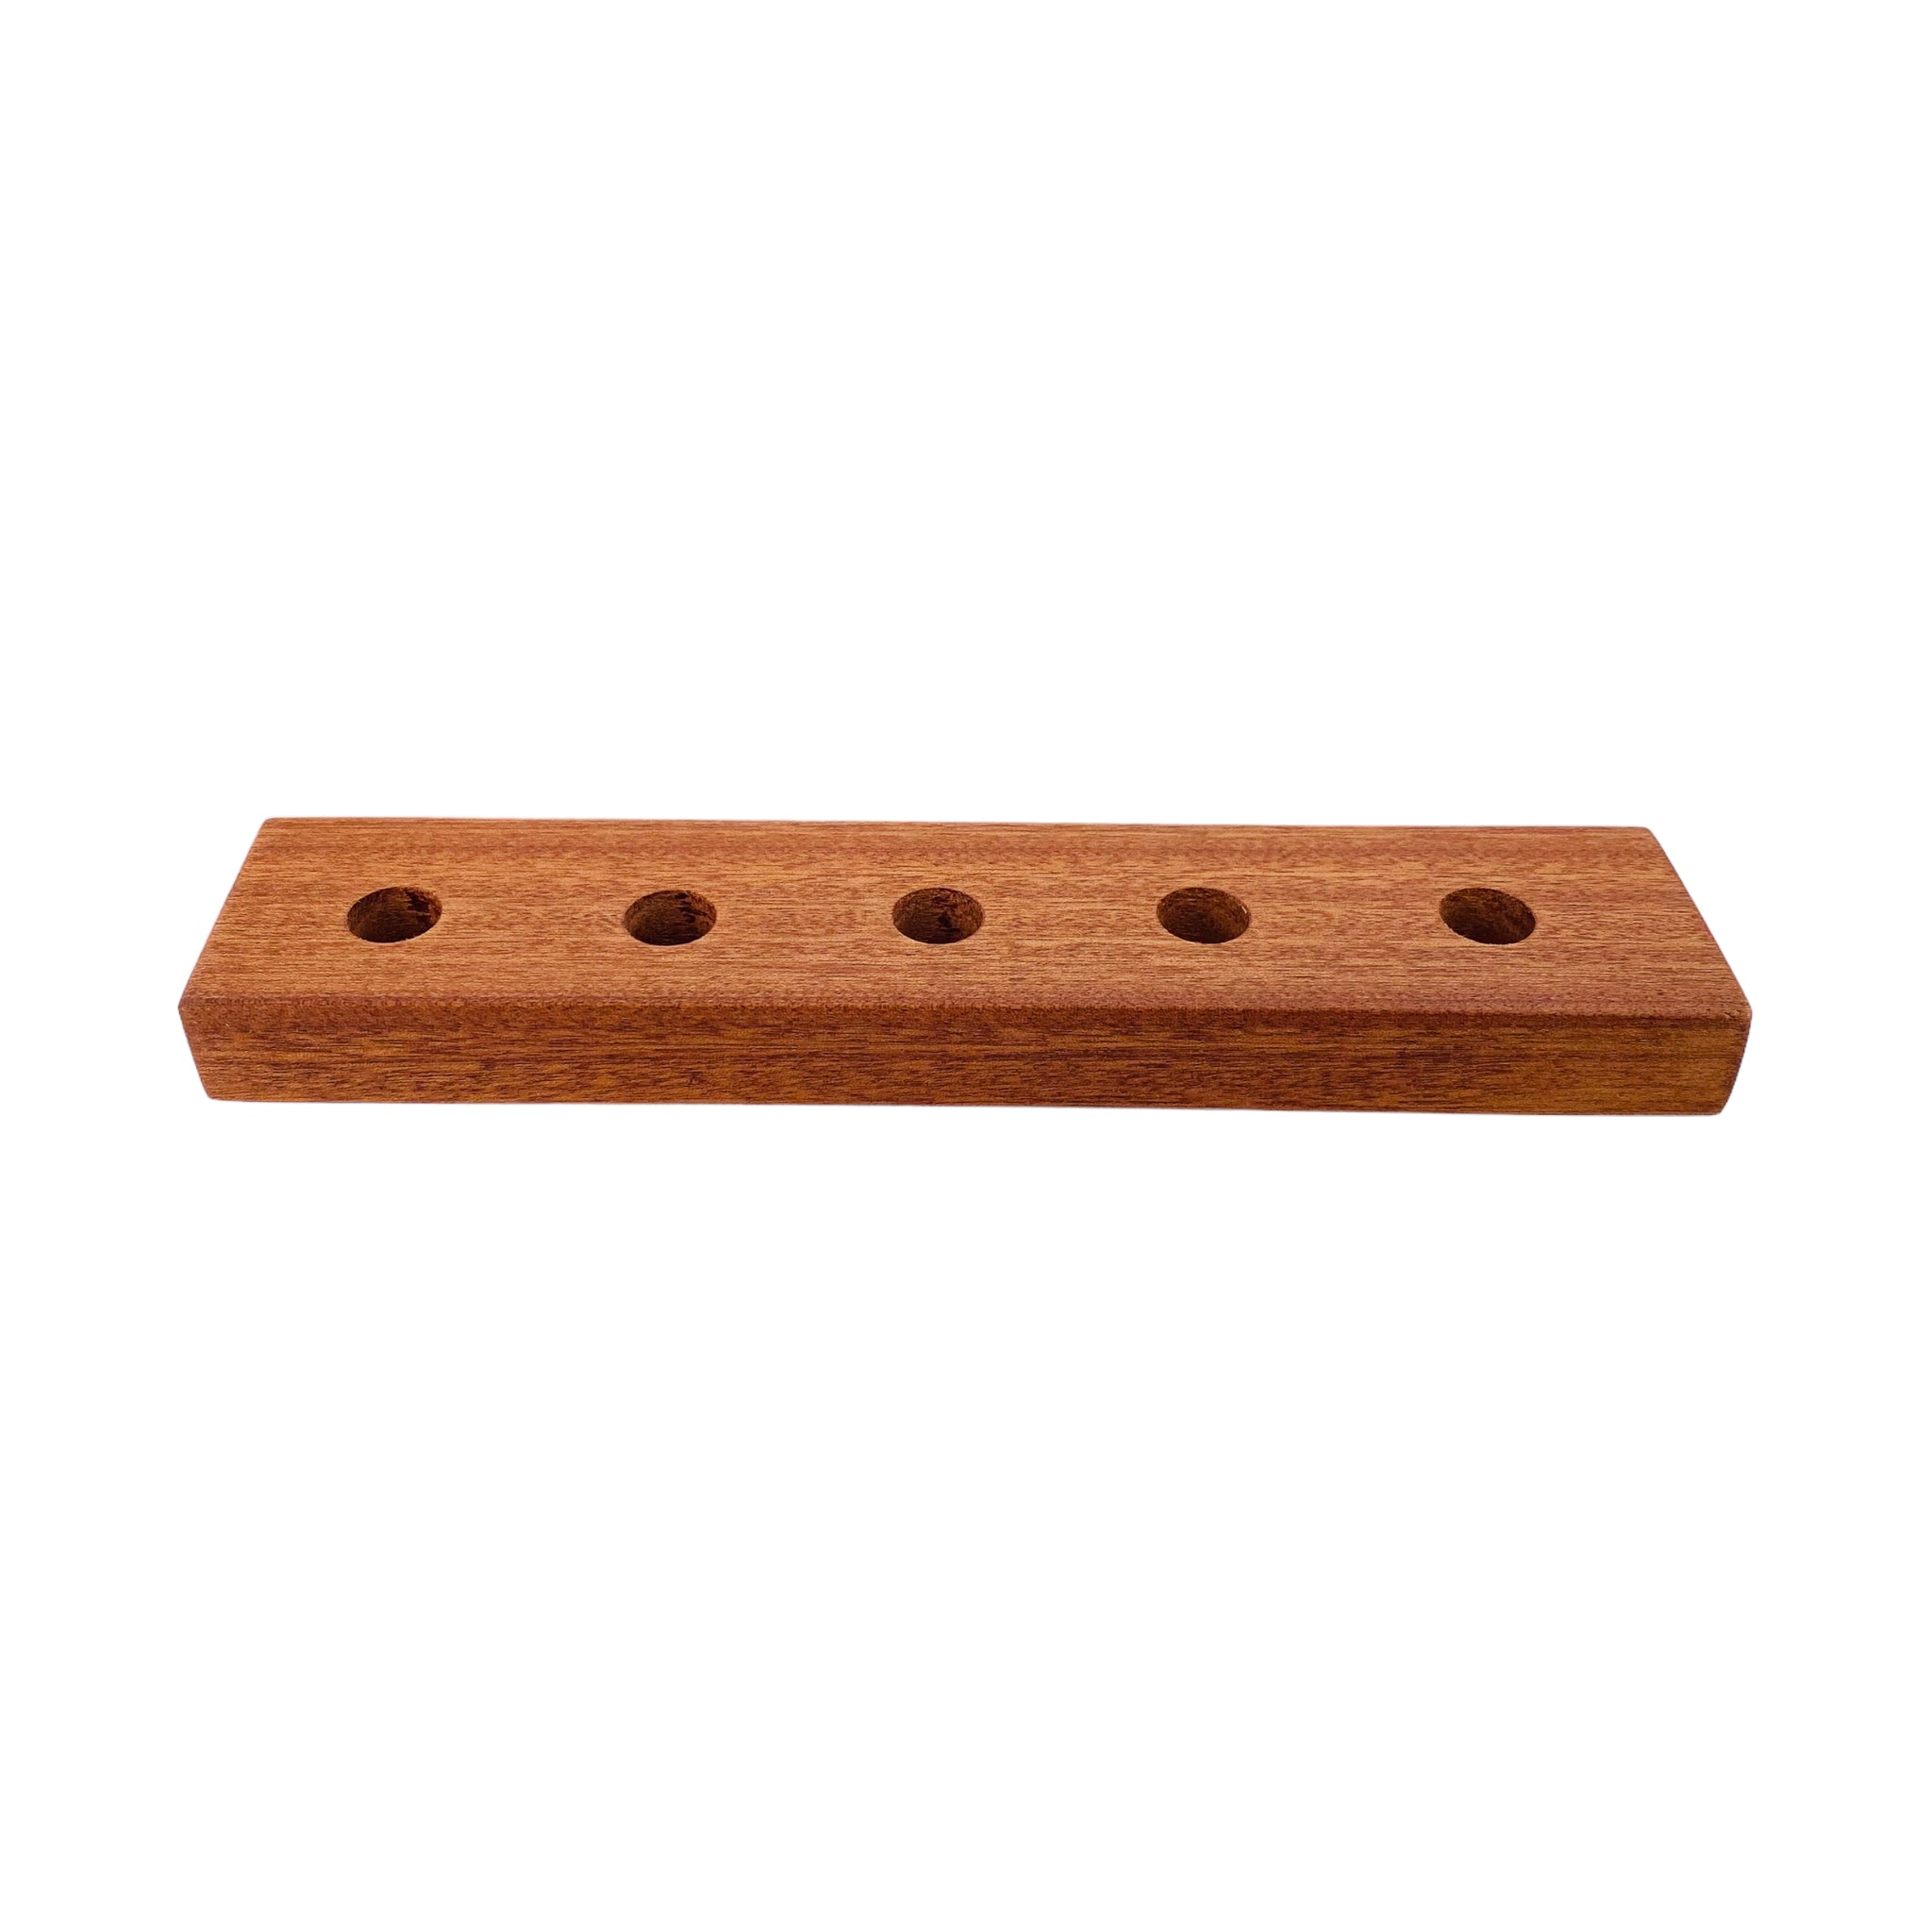 5 Hole Wood Display Stand Holder For 14mm Bong Bowl Pieces Or Quartz Bangers - Mahogany Plank